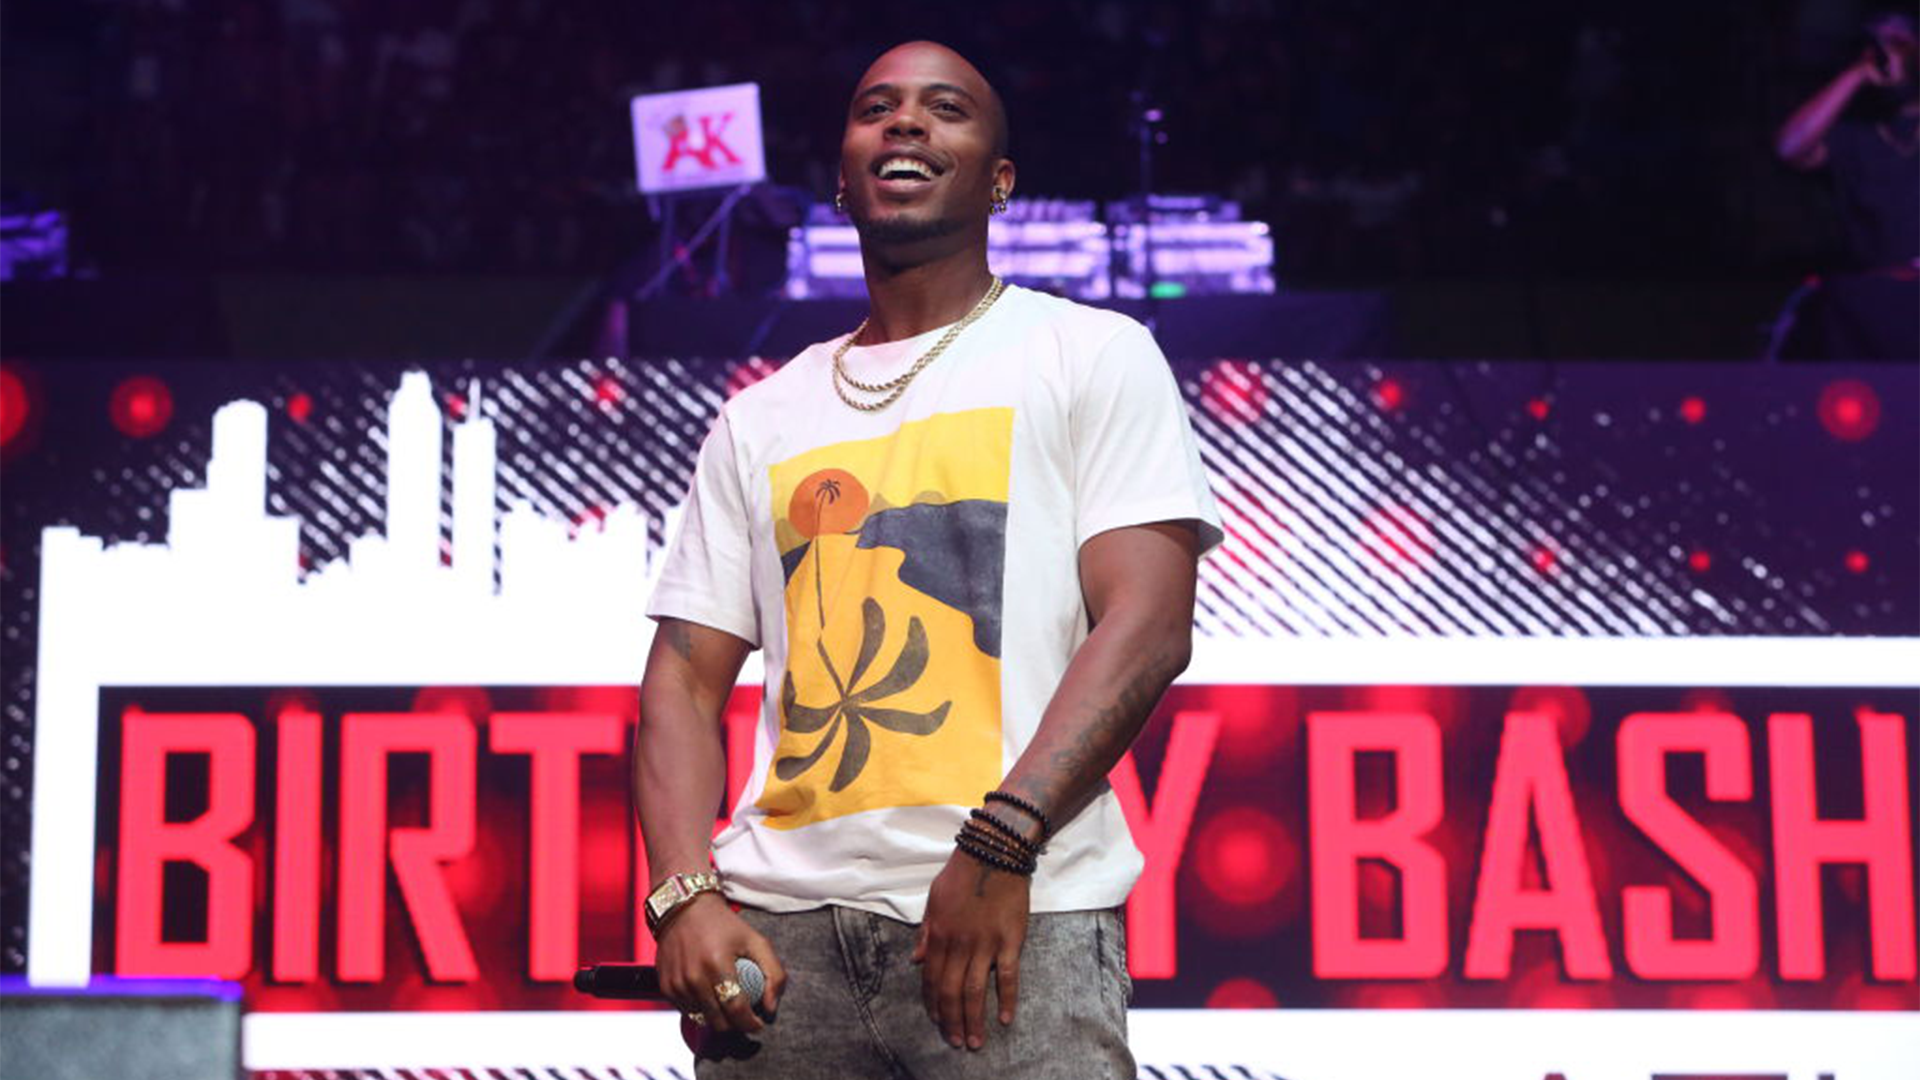 'Nothin' On You' Artist B.o.B Reportedly Wrapped Up In Lawsuit Over $3M In Unpaid Royalties